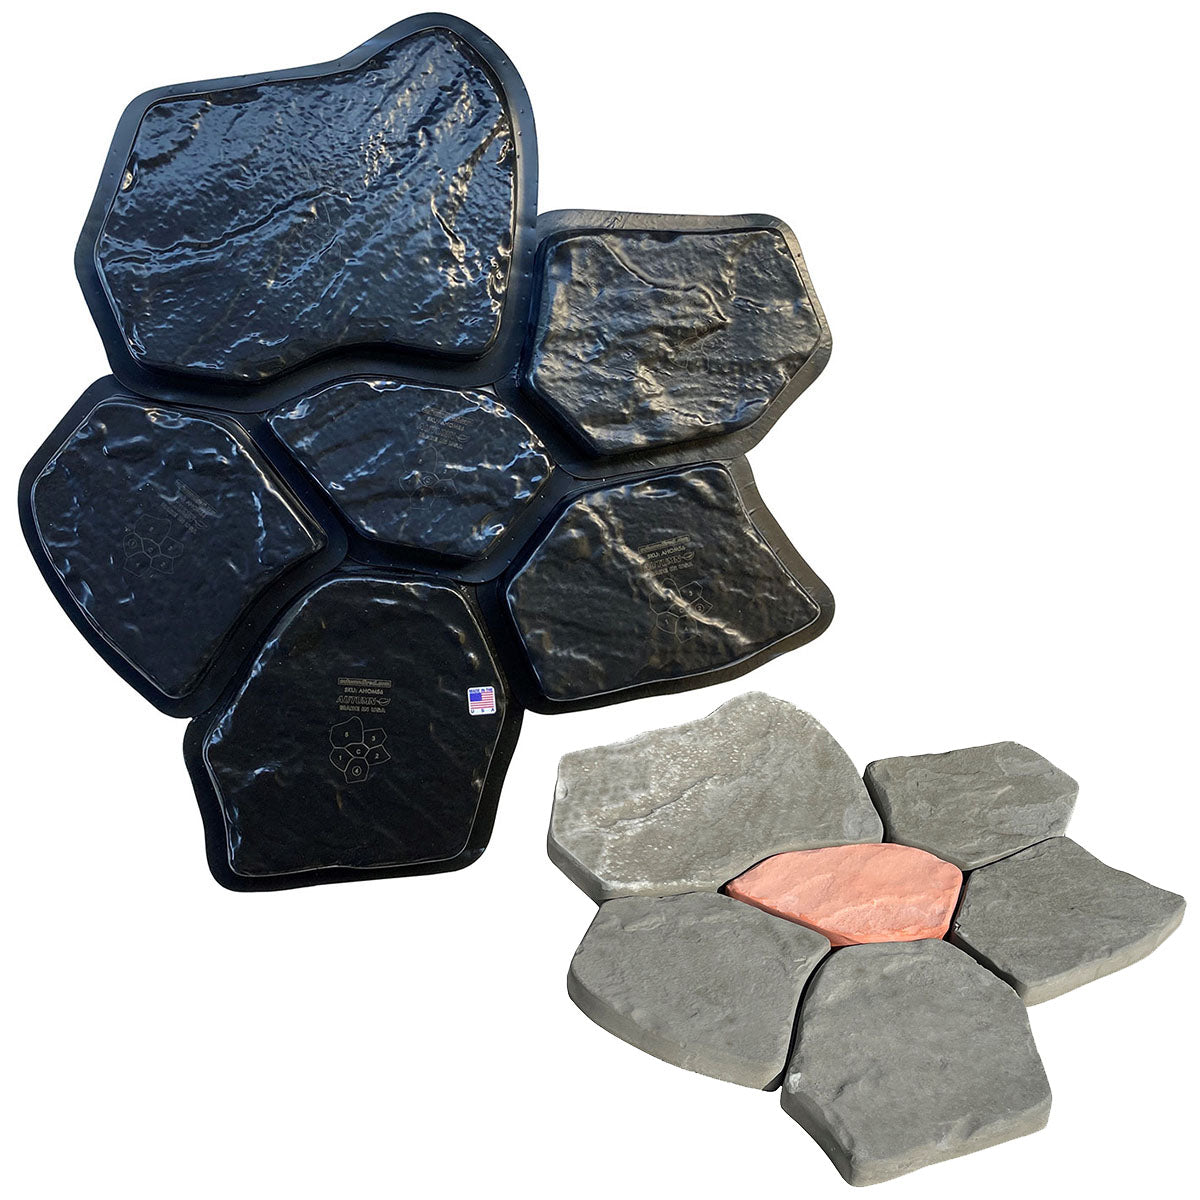 Rock Look concrete stepping stone mold set 2031 - Moldcreations